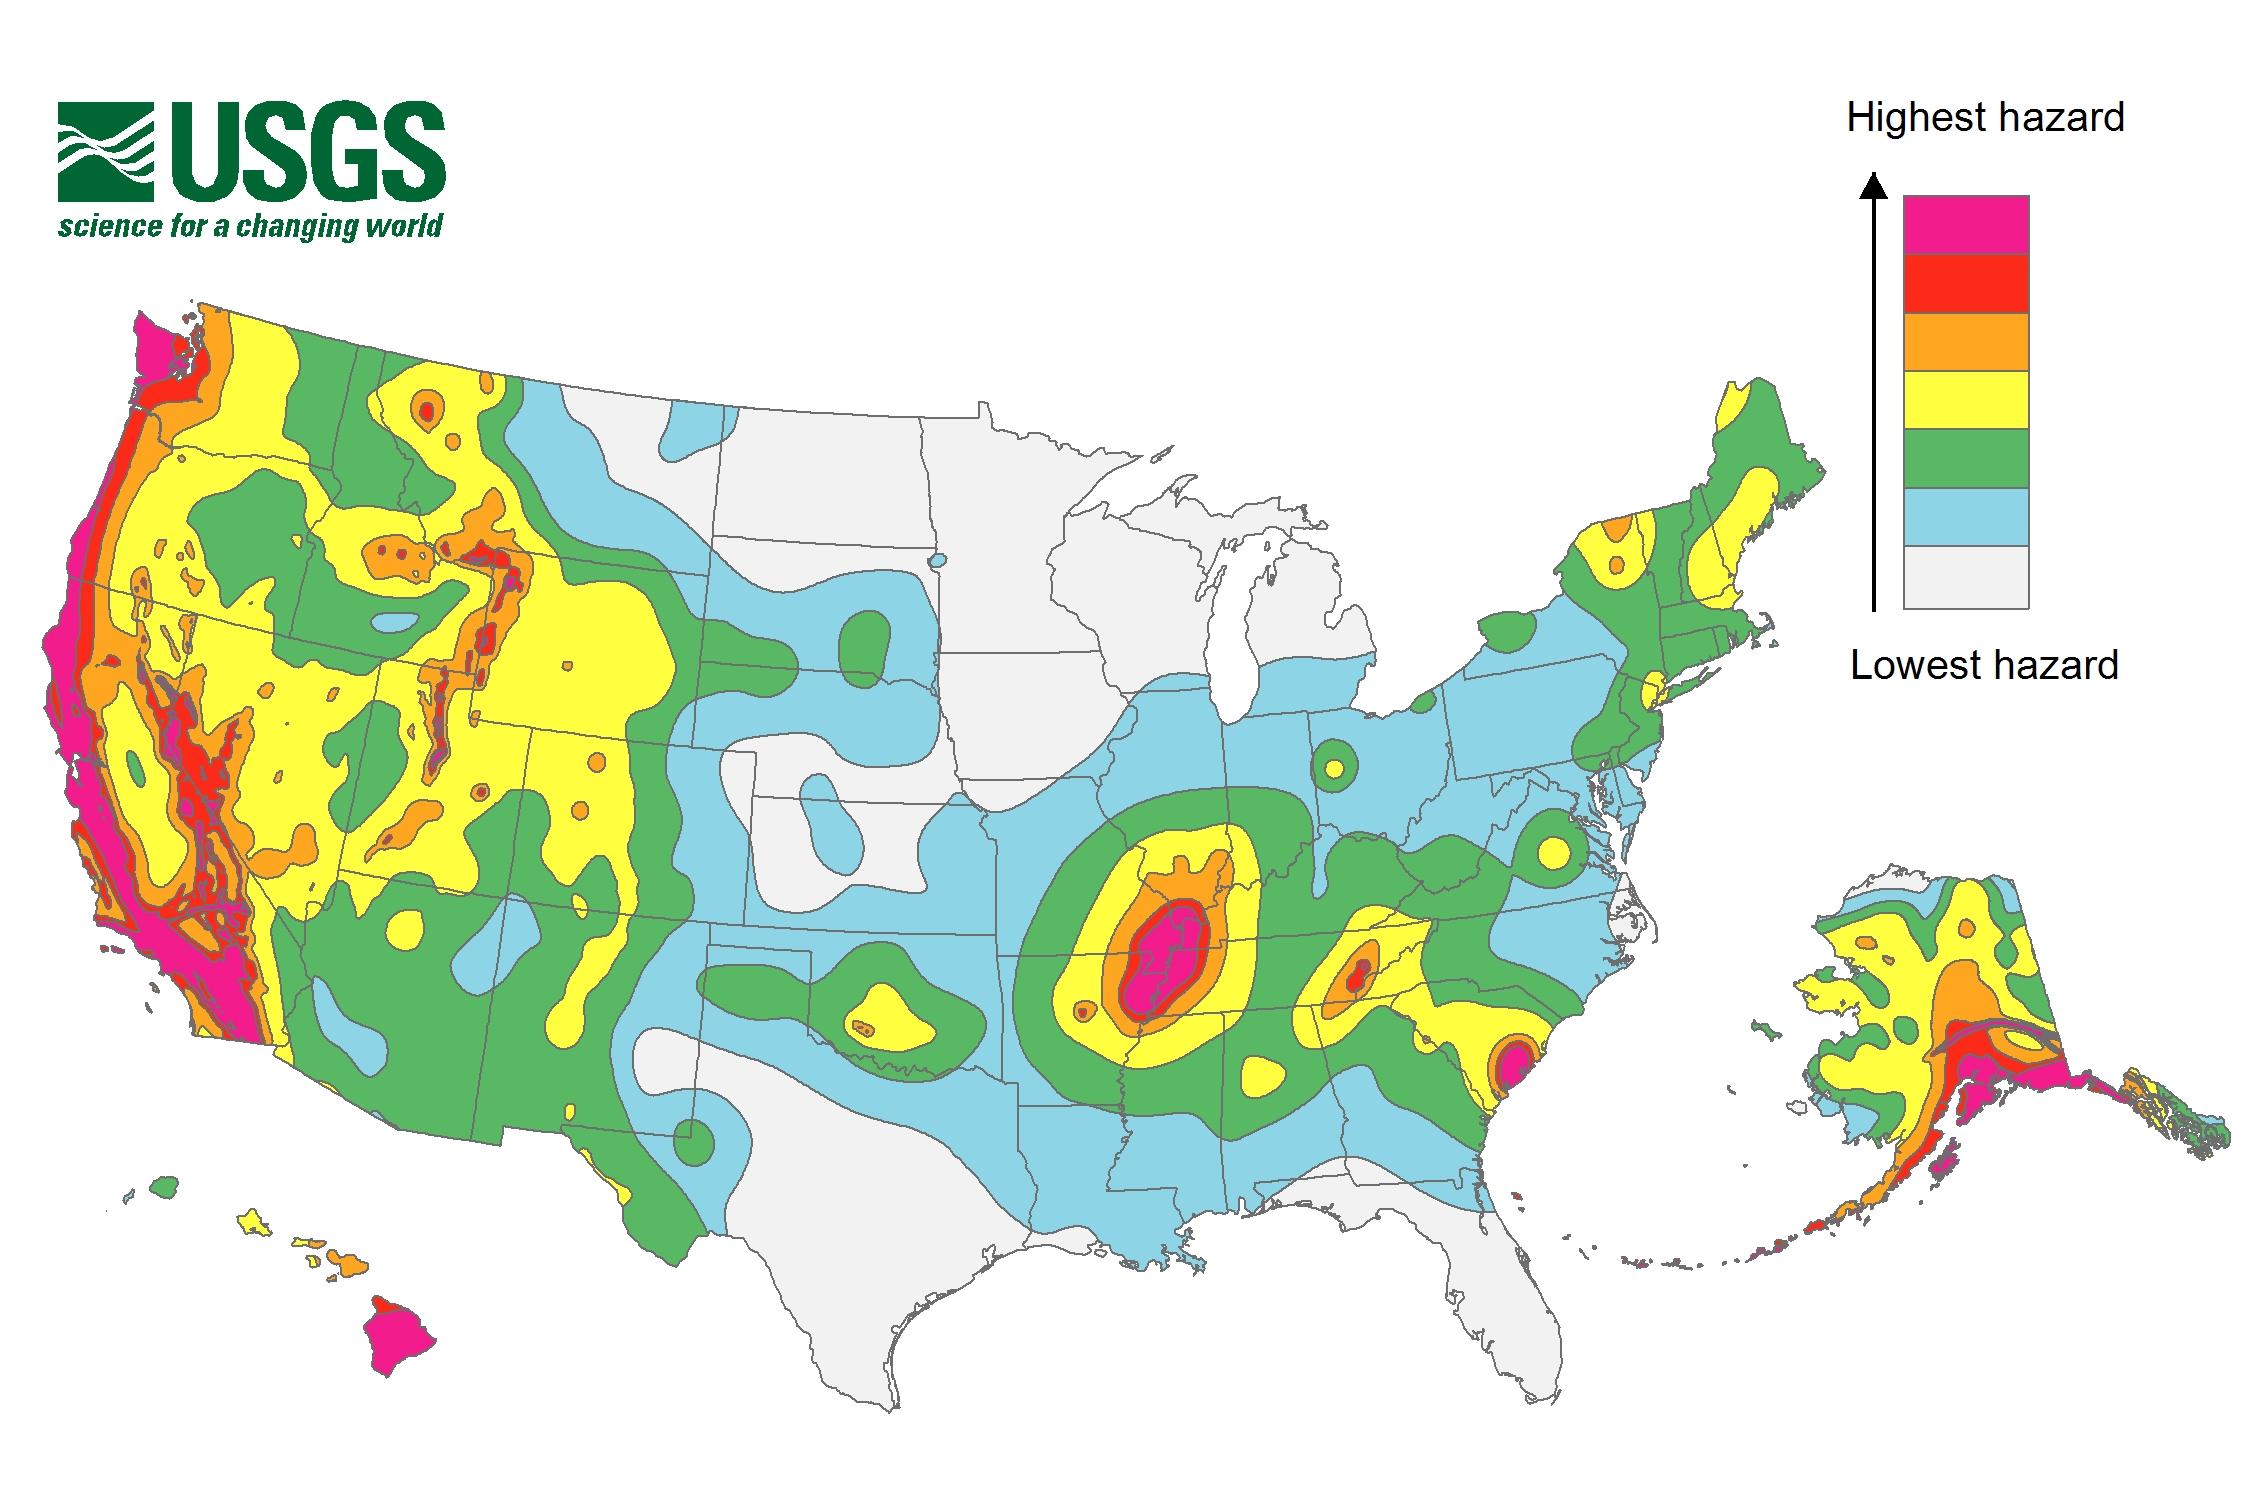 http://mediad.publicbroadcasting.net/p/kuow/files/styles/x_large/public/201507/usgs-earthquake-map_0.jpg